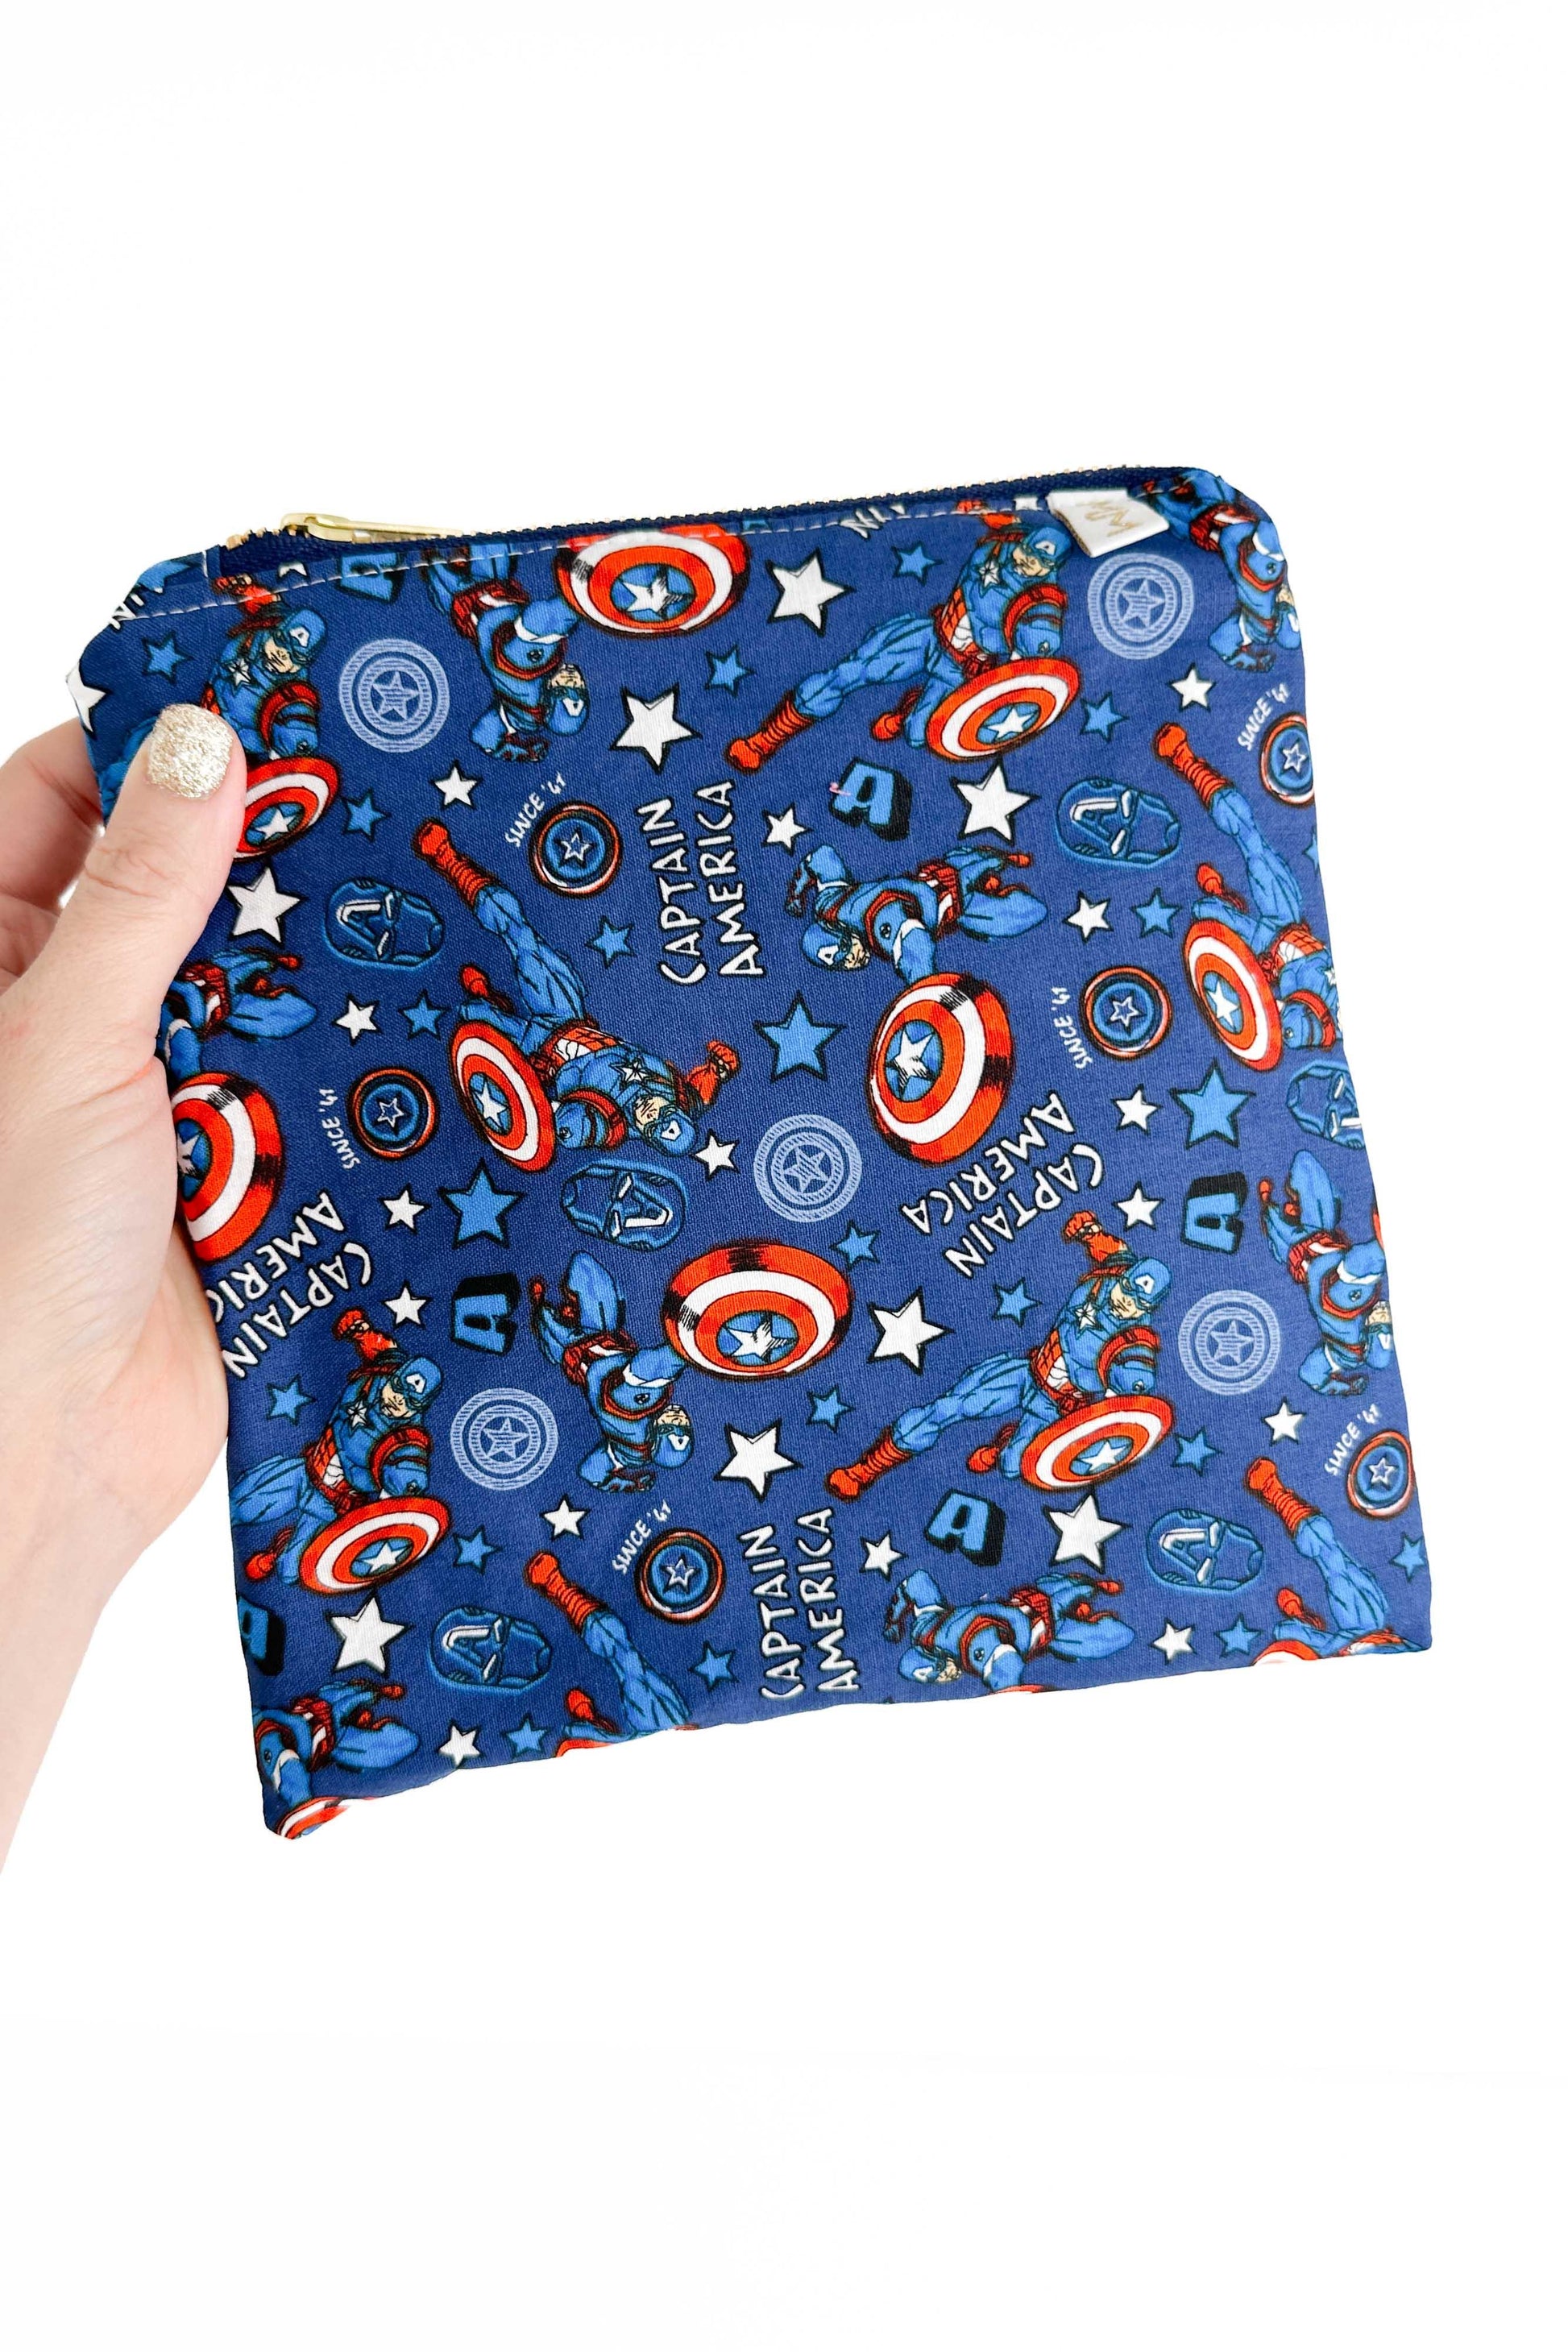 Captain A Small Wet Bag READY TO SHIP - Modern Makerie